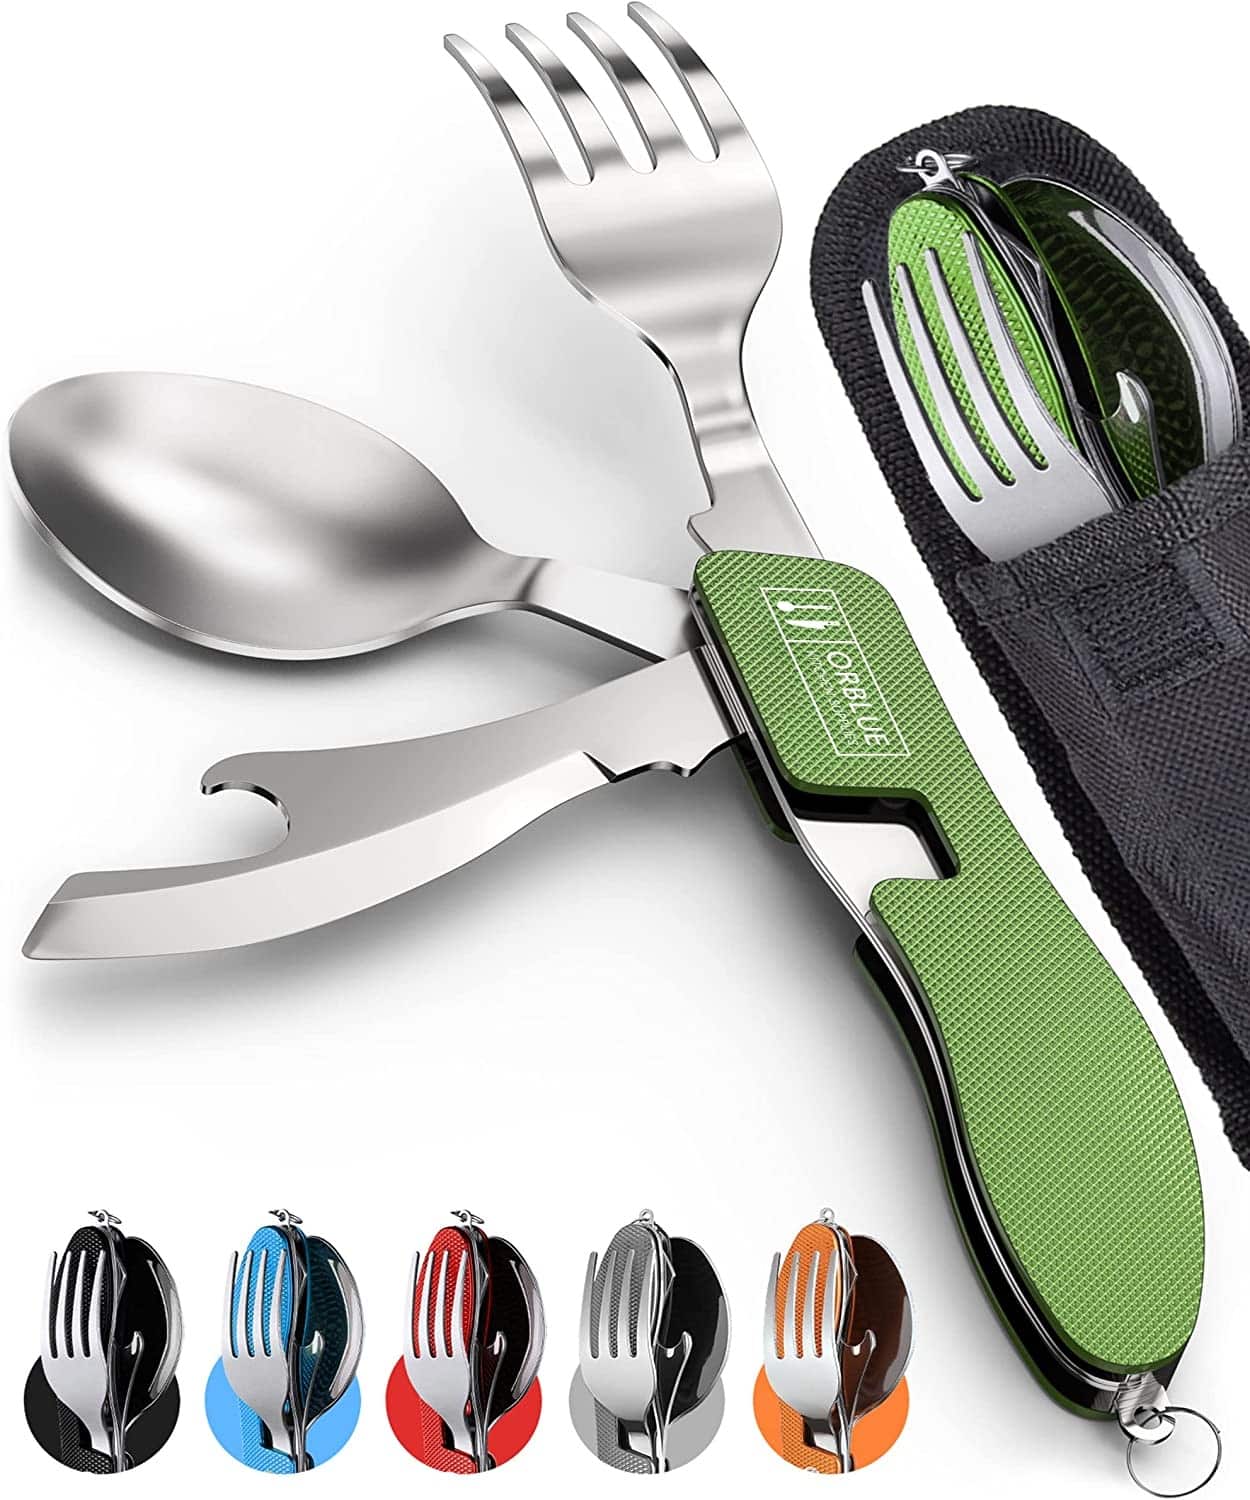 Orblue 4-in-1 Camping Utensils